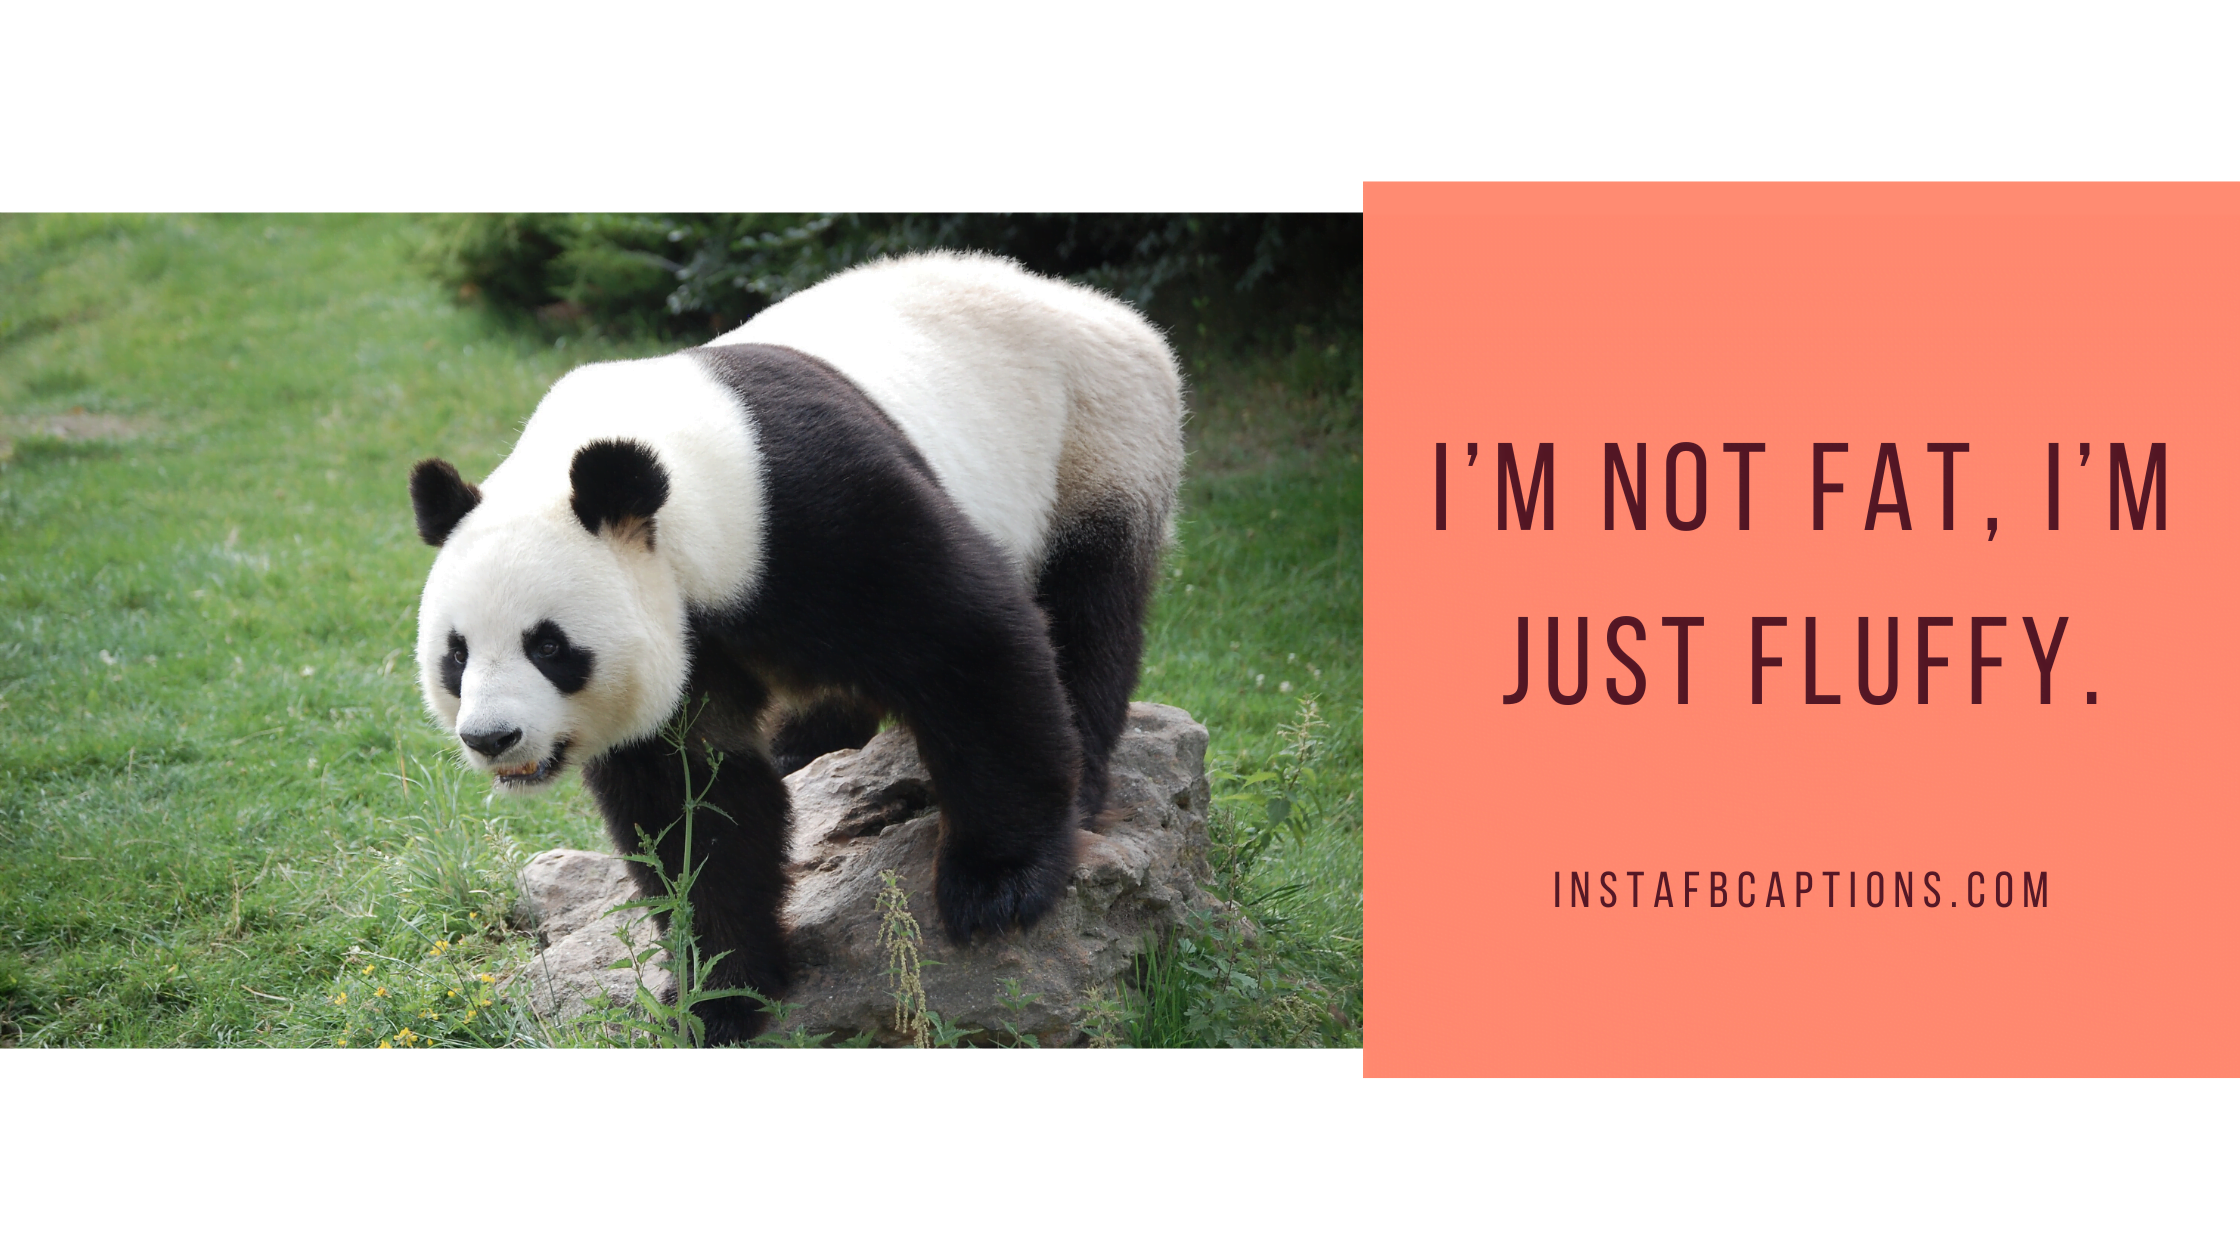 Funny Captions For Your Panda Captions  - Funny Captions for your Panda Captions - Panda Lover Captions for Instagram Pictures in 2023